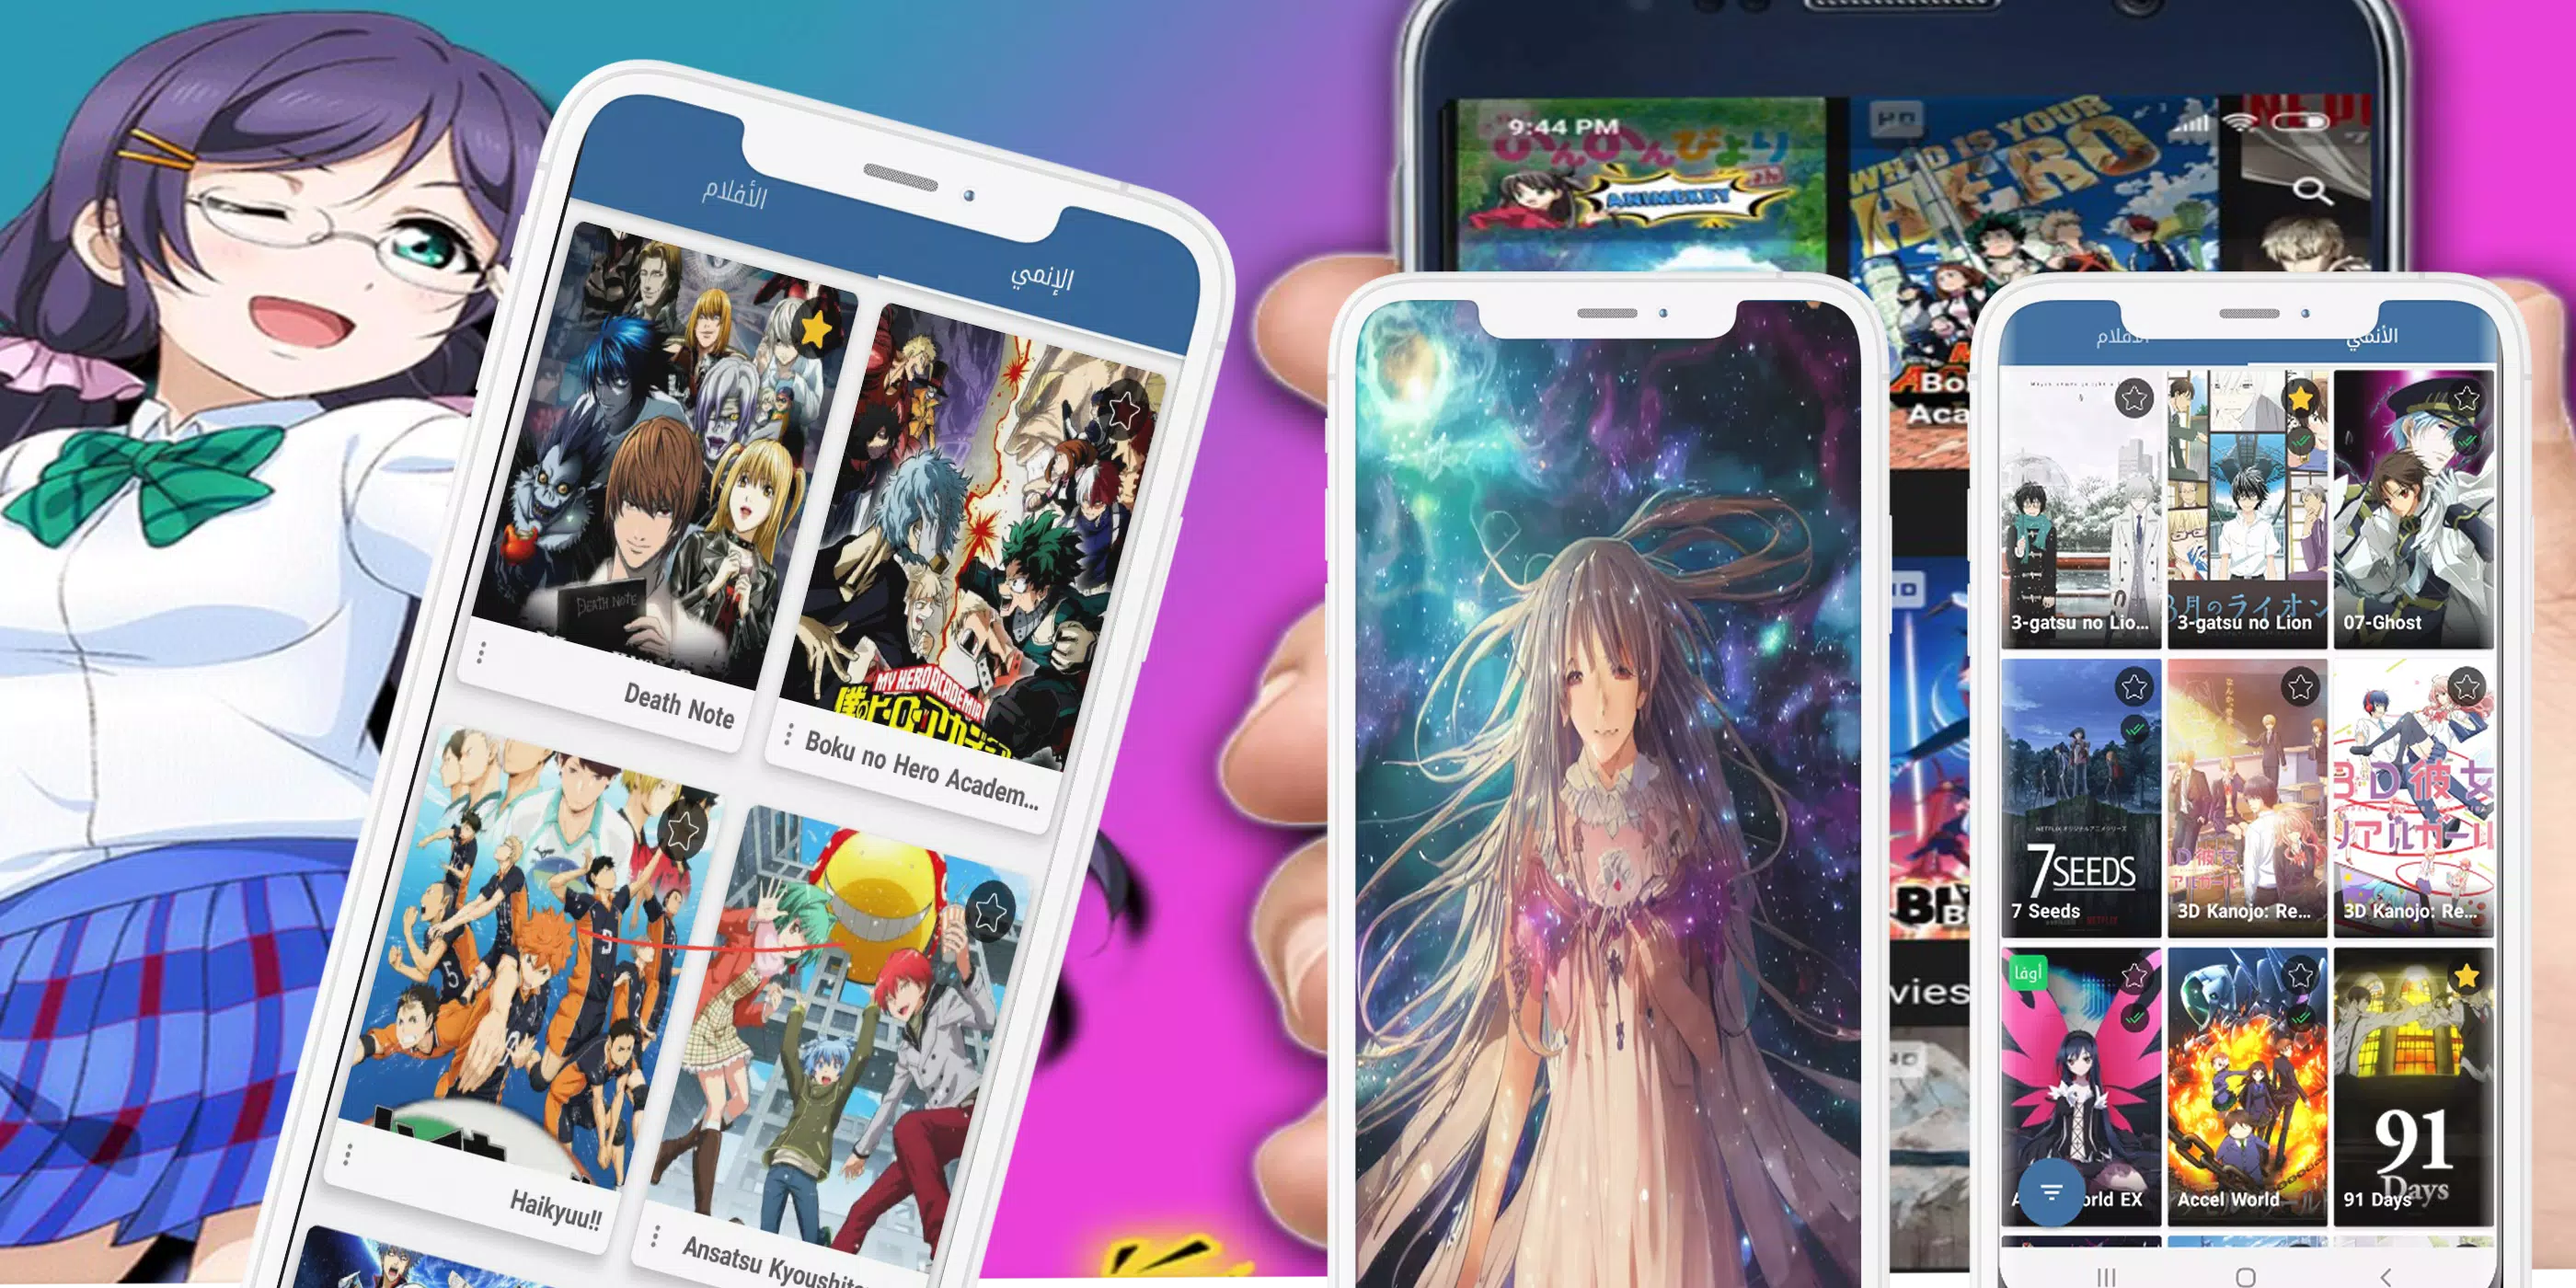 AnimeKey - Latest version for Android - Download APK